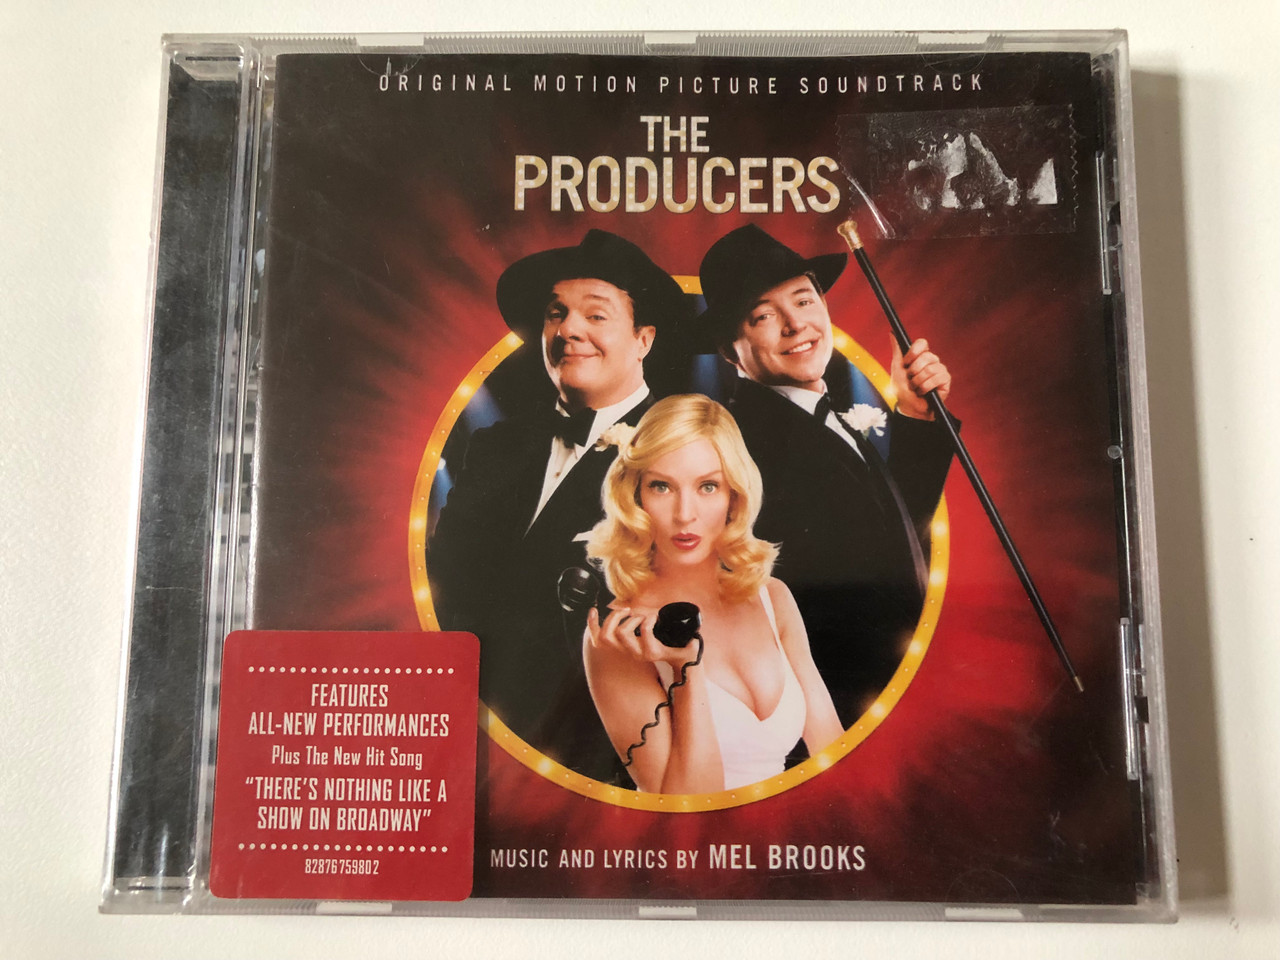 https://cdn10.bigcommerce.com/s-62bdpkt7pb/products/0/images/257120/The_Producers_Original_Motion_Picture_Soundtrack_-_Music_And_Lyrics_By_Mel_Brooks_Features_All-New_Performances_Plus_The_New_Hit_Song_Theres_Nothing_Like_A_Show_On_Broadway_Sony_C_1__95159.1666885537.1280.1280.JPG?c=2&_gl=1*11flyup*_ga*MjA2NTIxMjE2MC4xNTkwNTEyNTMy*_ga_WS2VZYPC6G*MTY2Njg3MzQxMS42MDUuMS4xNjY2ODg1NTQ0LjYwLjAuMA..